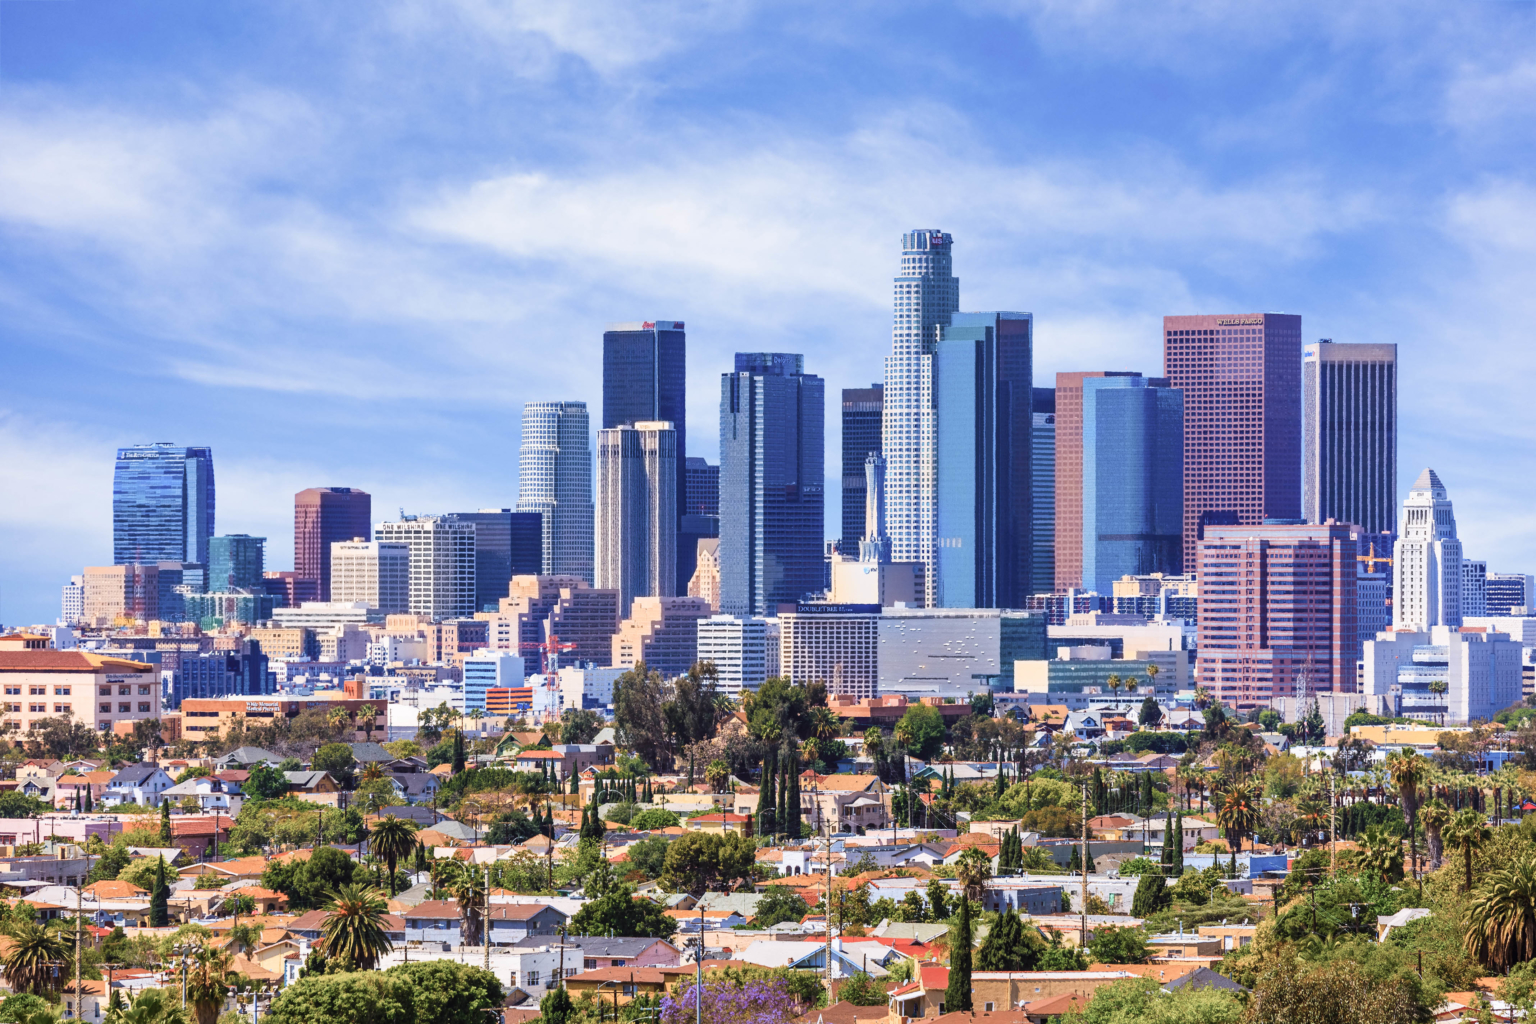 downtown los angeles skyline with a lowrise neighborhood in the foreground